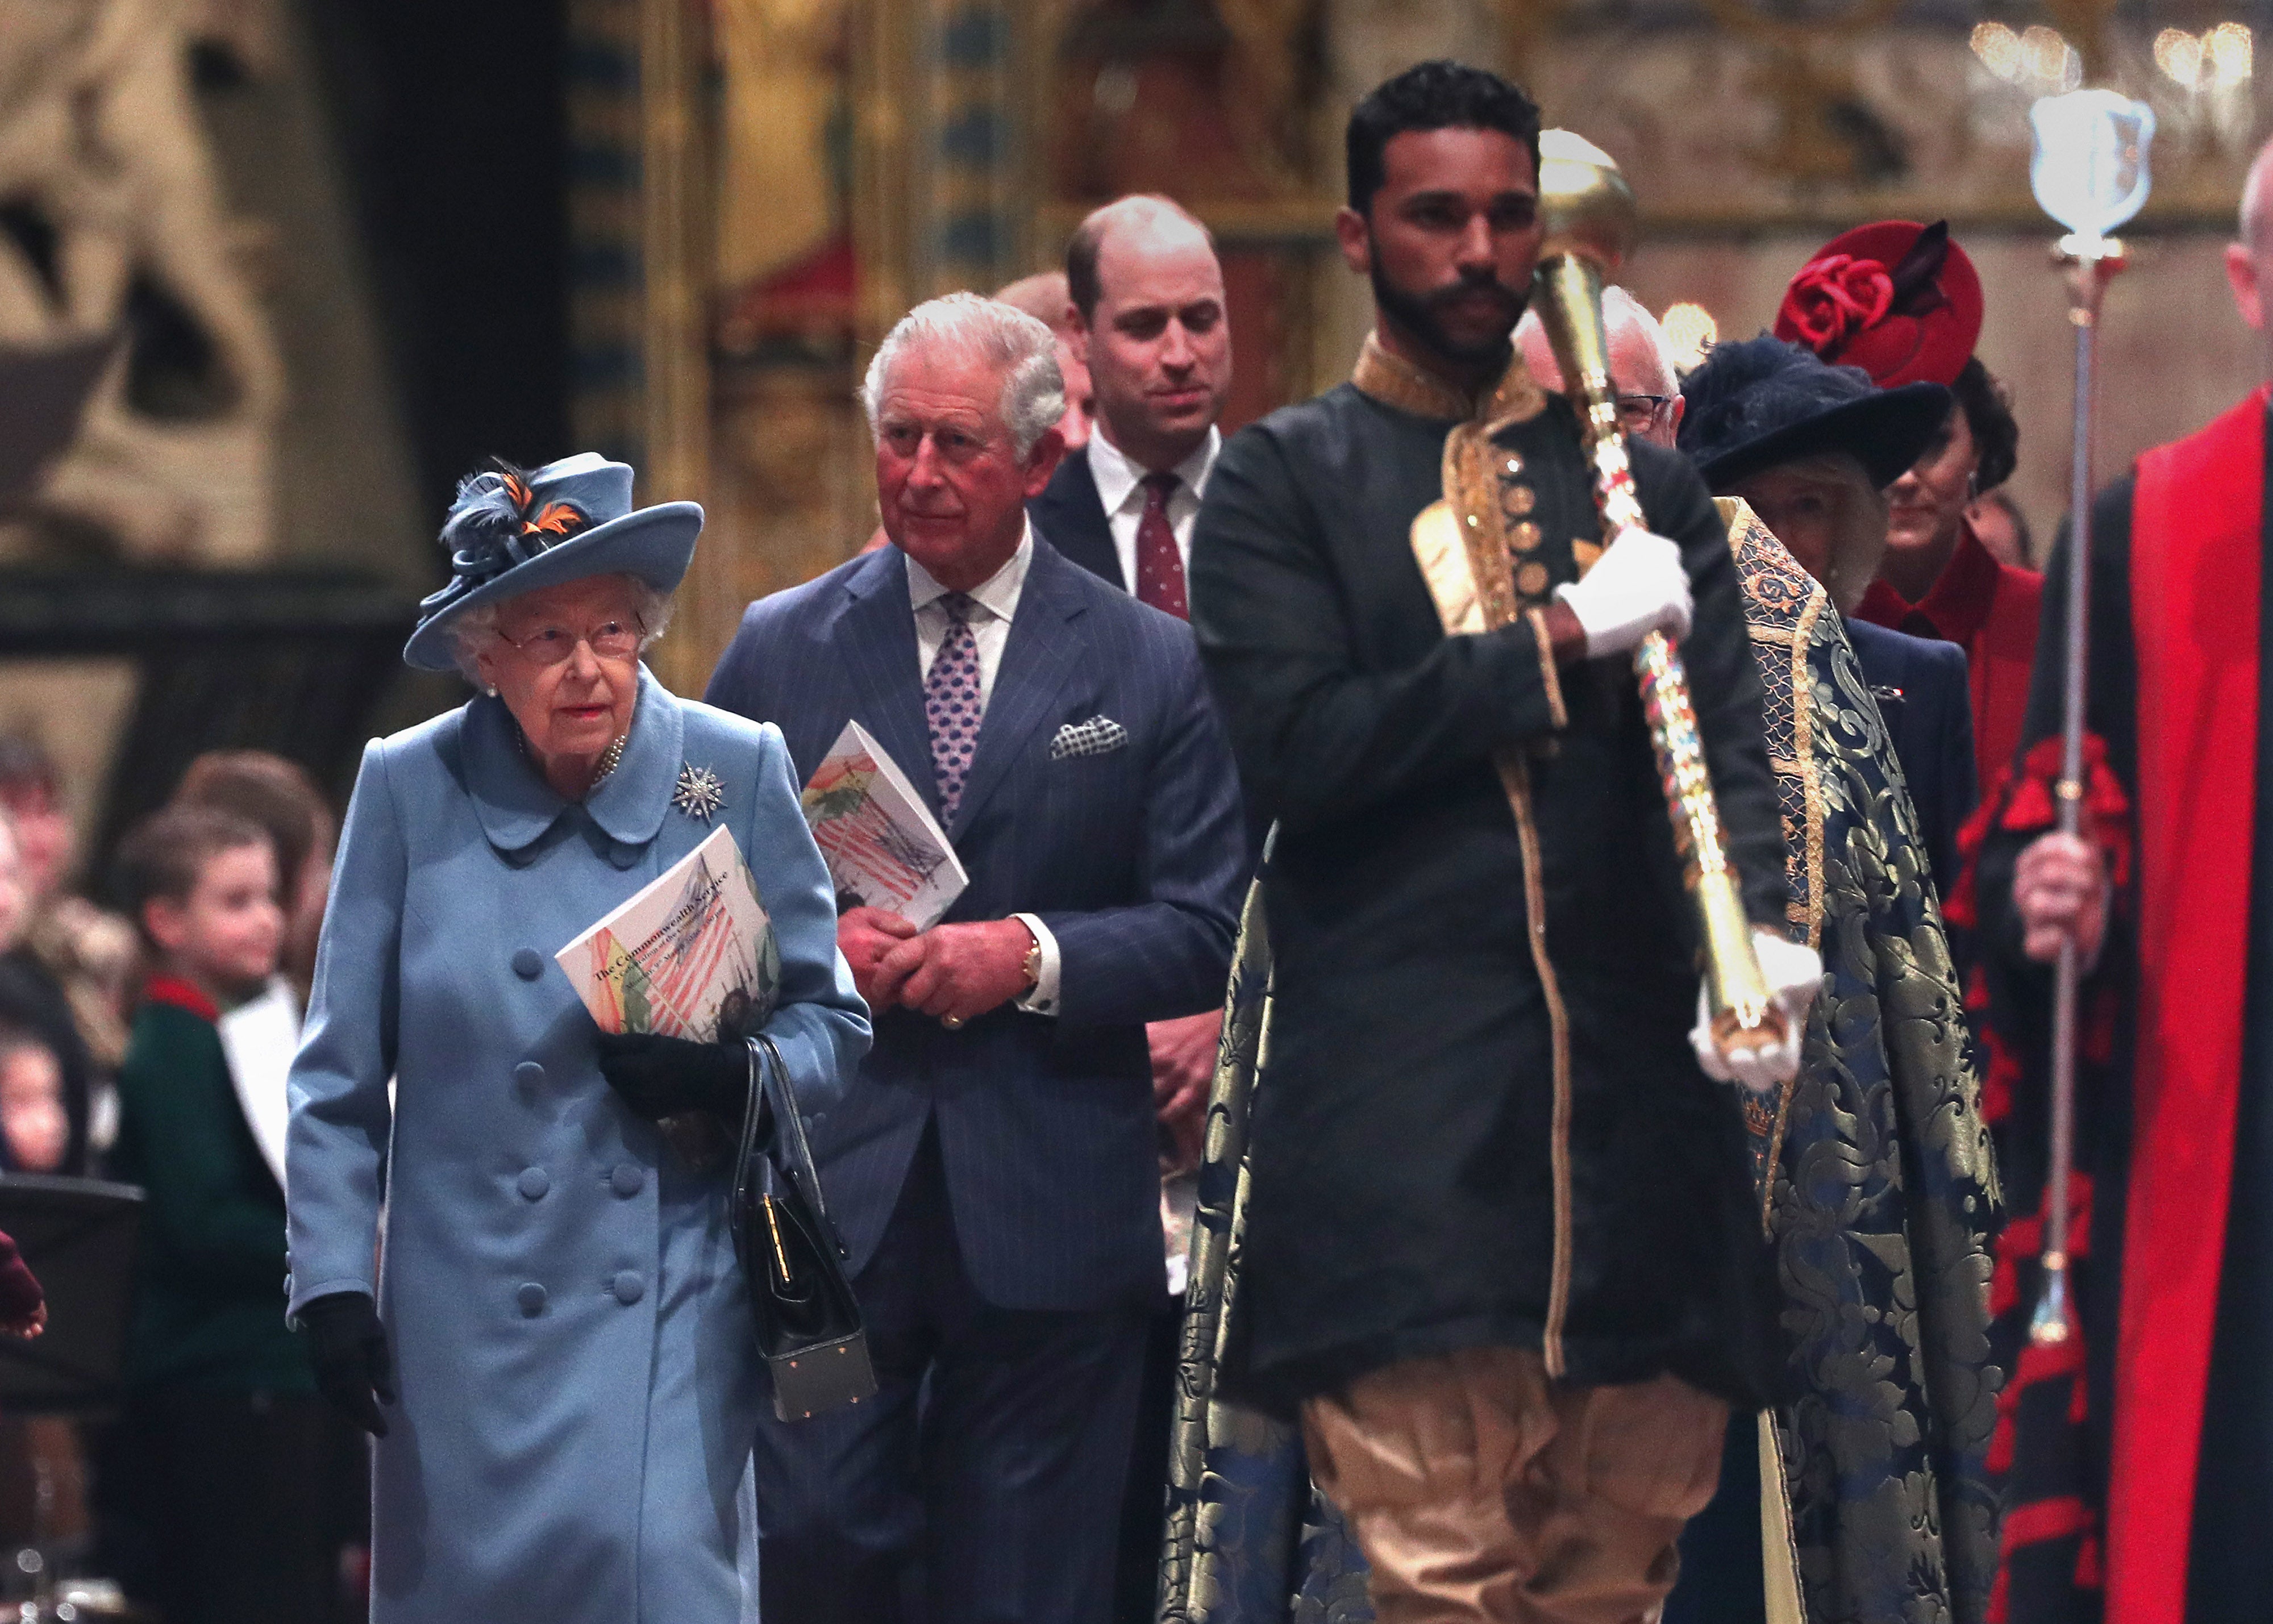 The Queen at the Commonwealth Day service in 2020 (Yui Mok/PA)